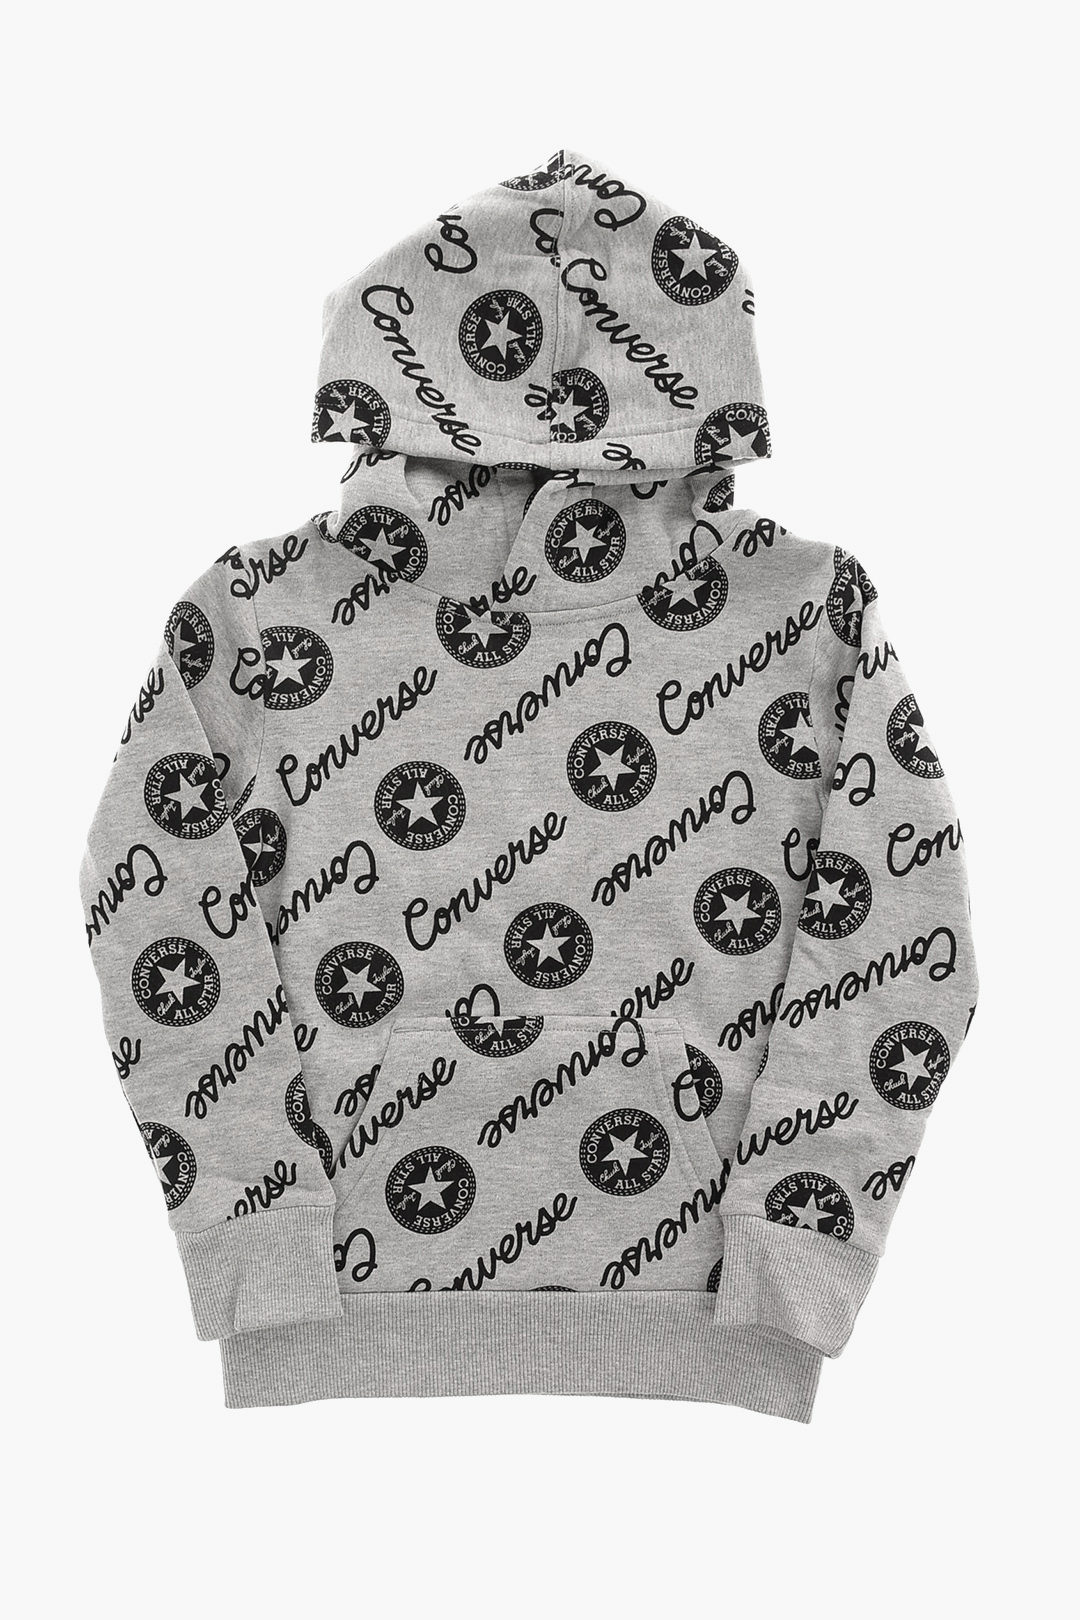 Converse KIDS ALL STAR All Over Logo Sweatshirt with Hood boys - Glamood  Outlet